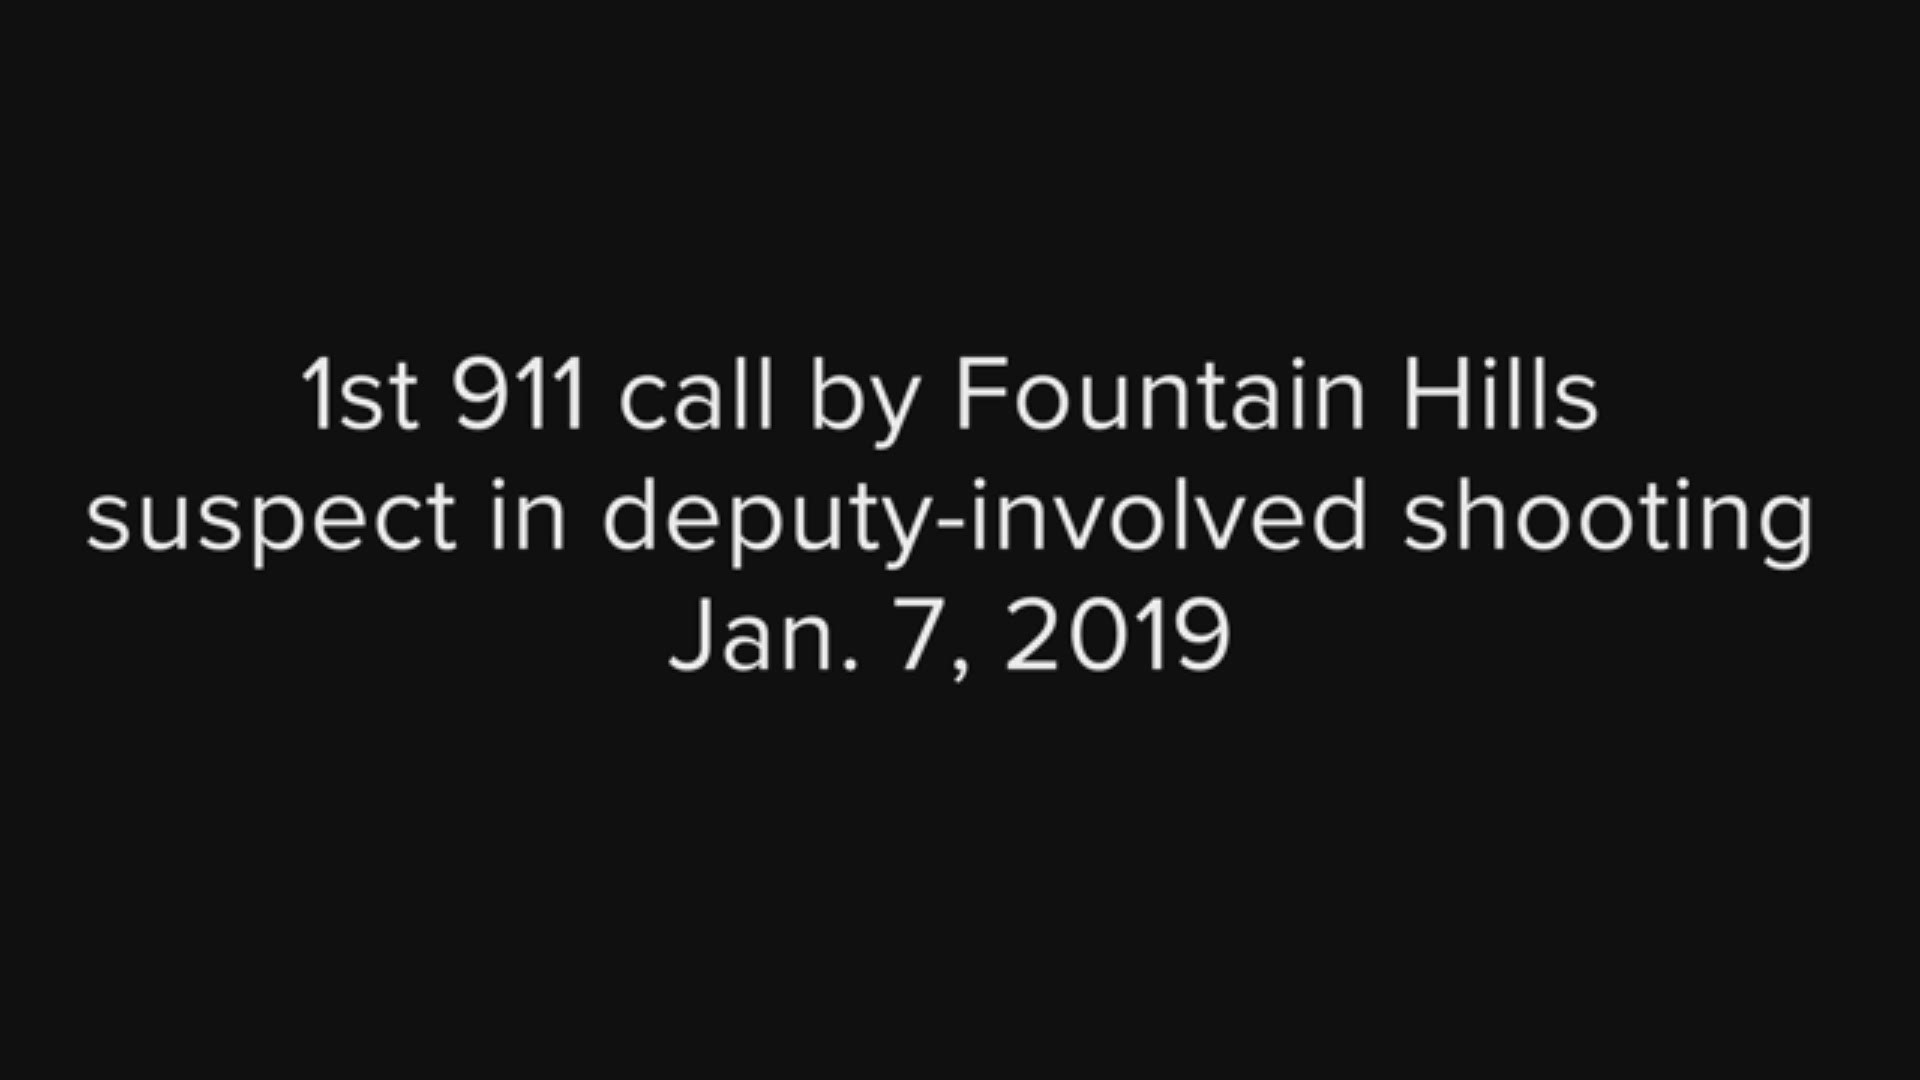 Authorities released the body camera video and 911 calls from the Jan. 7 attack outside a sheriff's substation in the suburb of Fountain Hills that led to the arrest of 18-year-old Ismail Hamed on aggravated assault and terrorism charges.